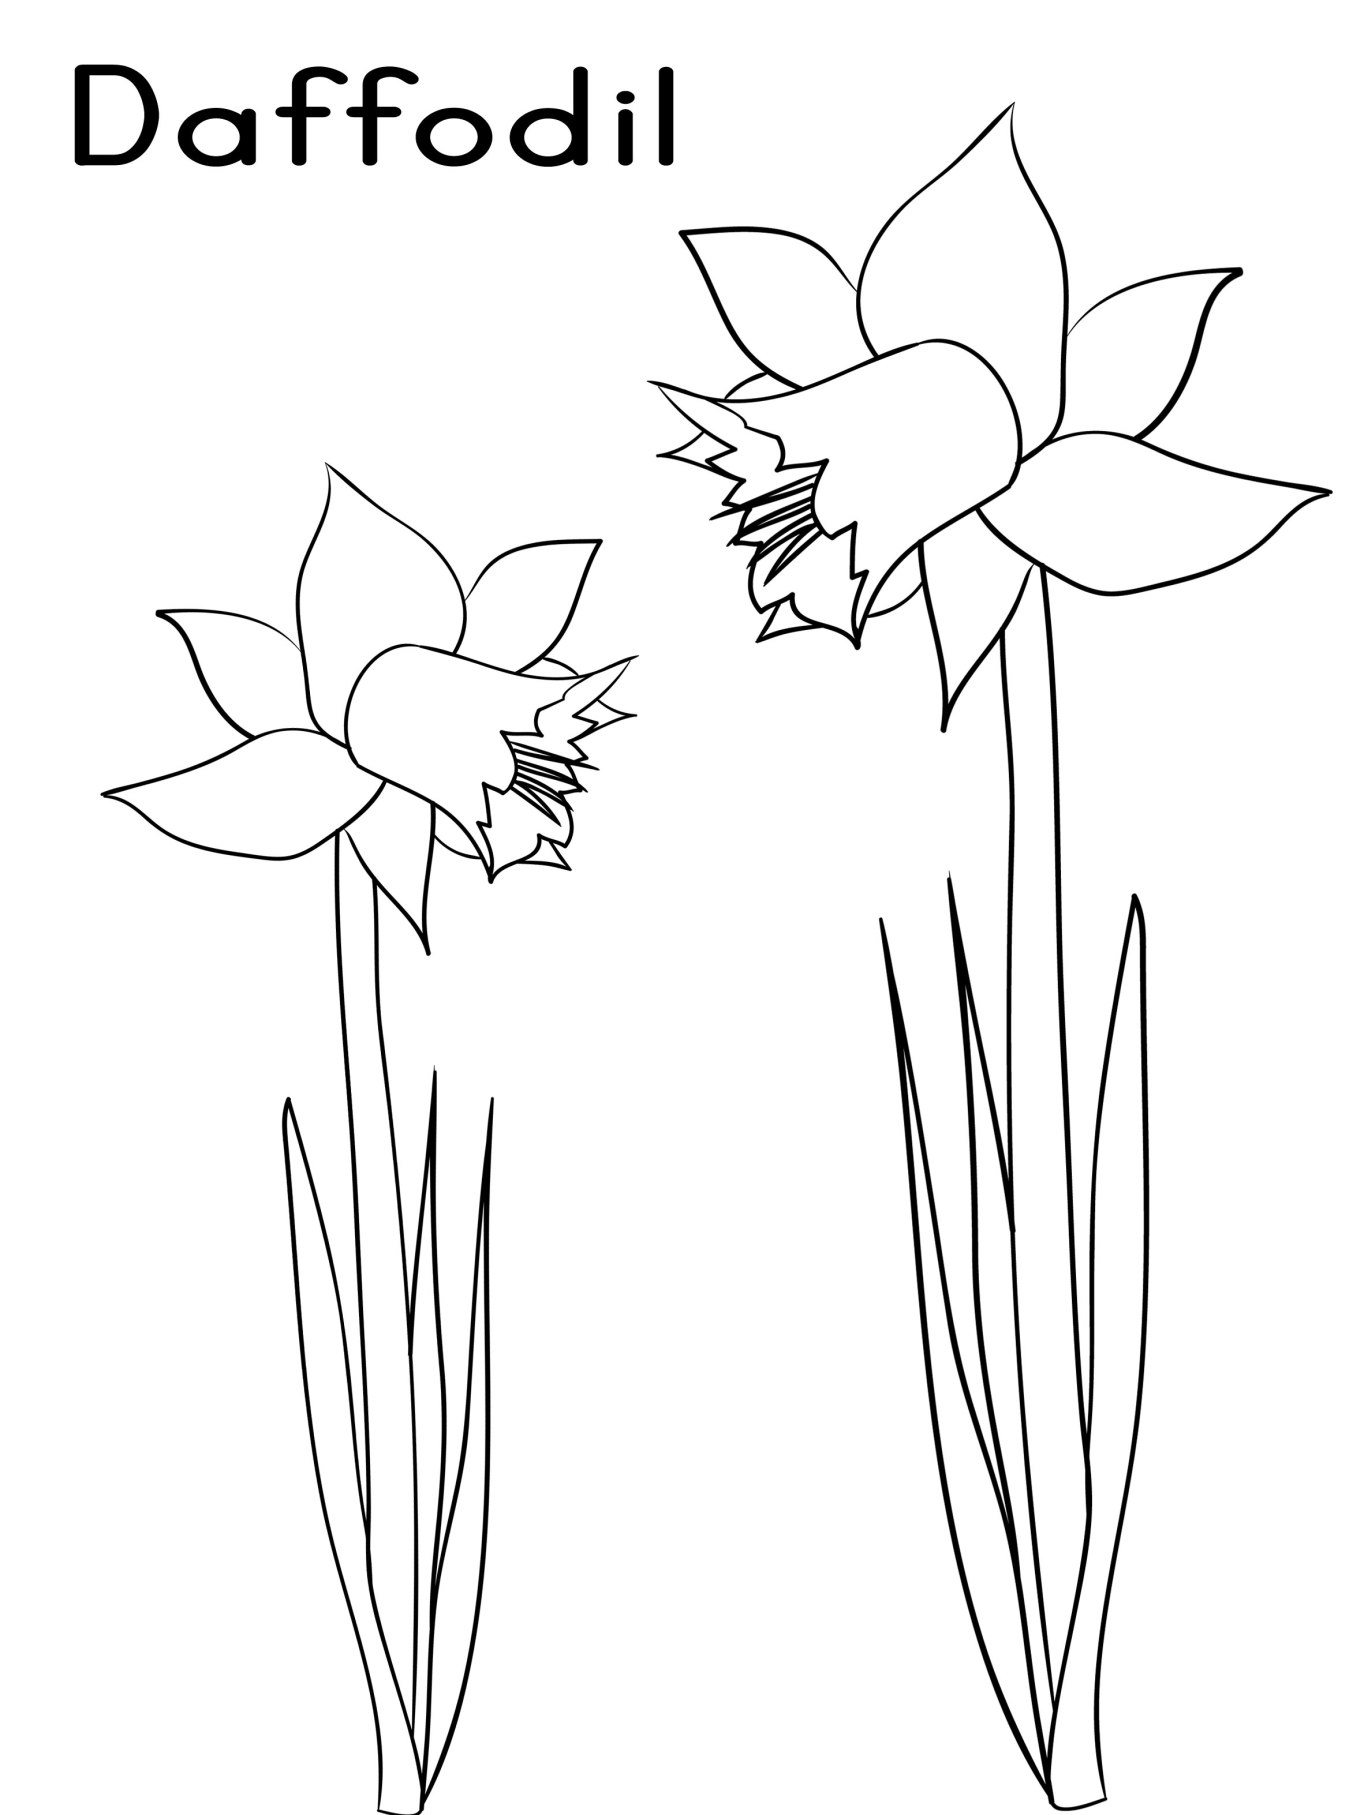 Daffodil Flower Coloring Page at Free printable